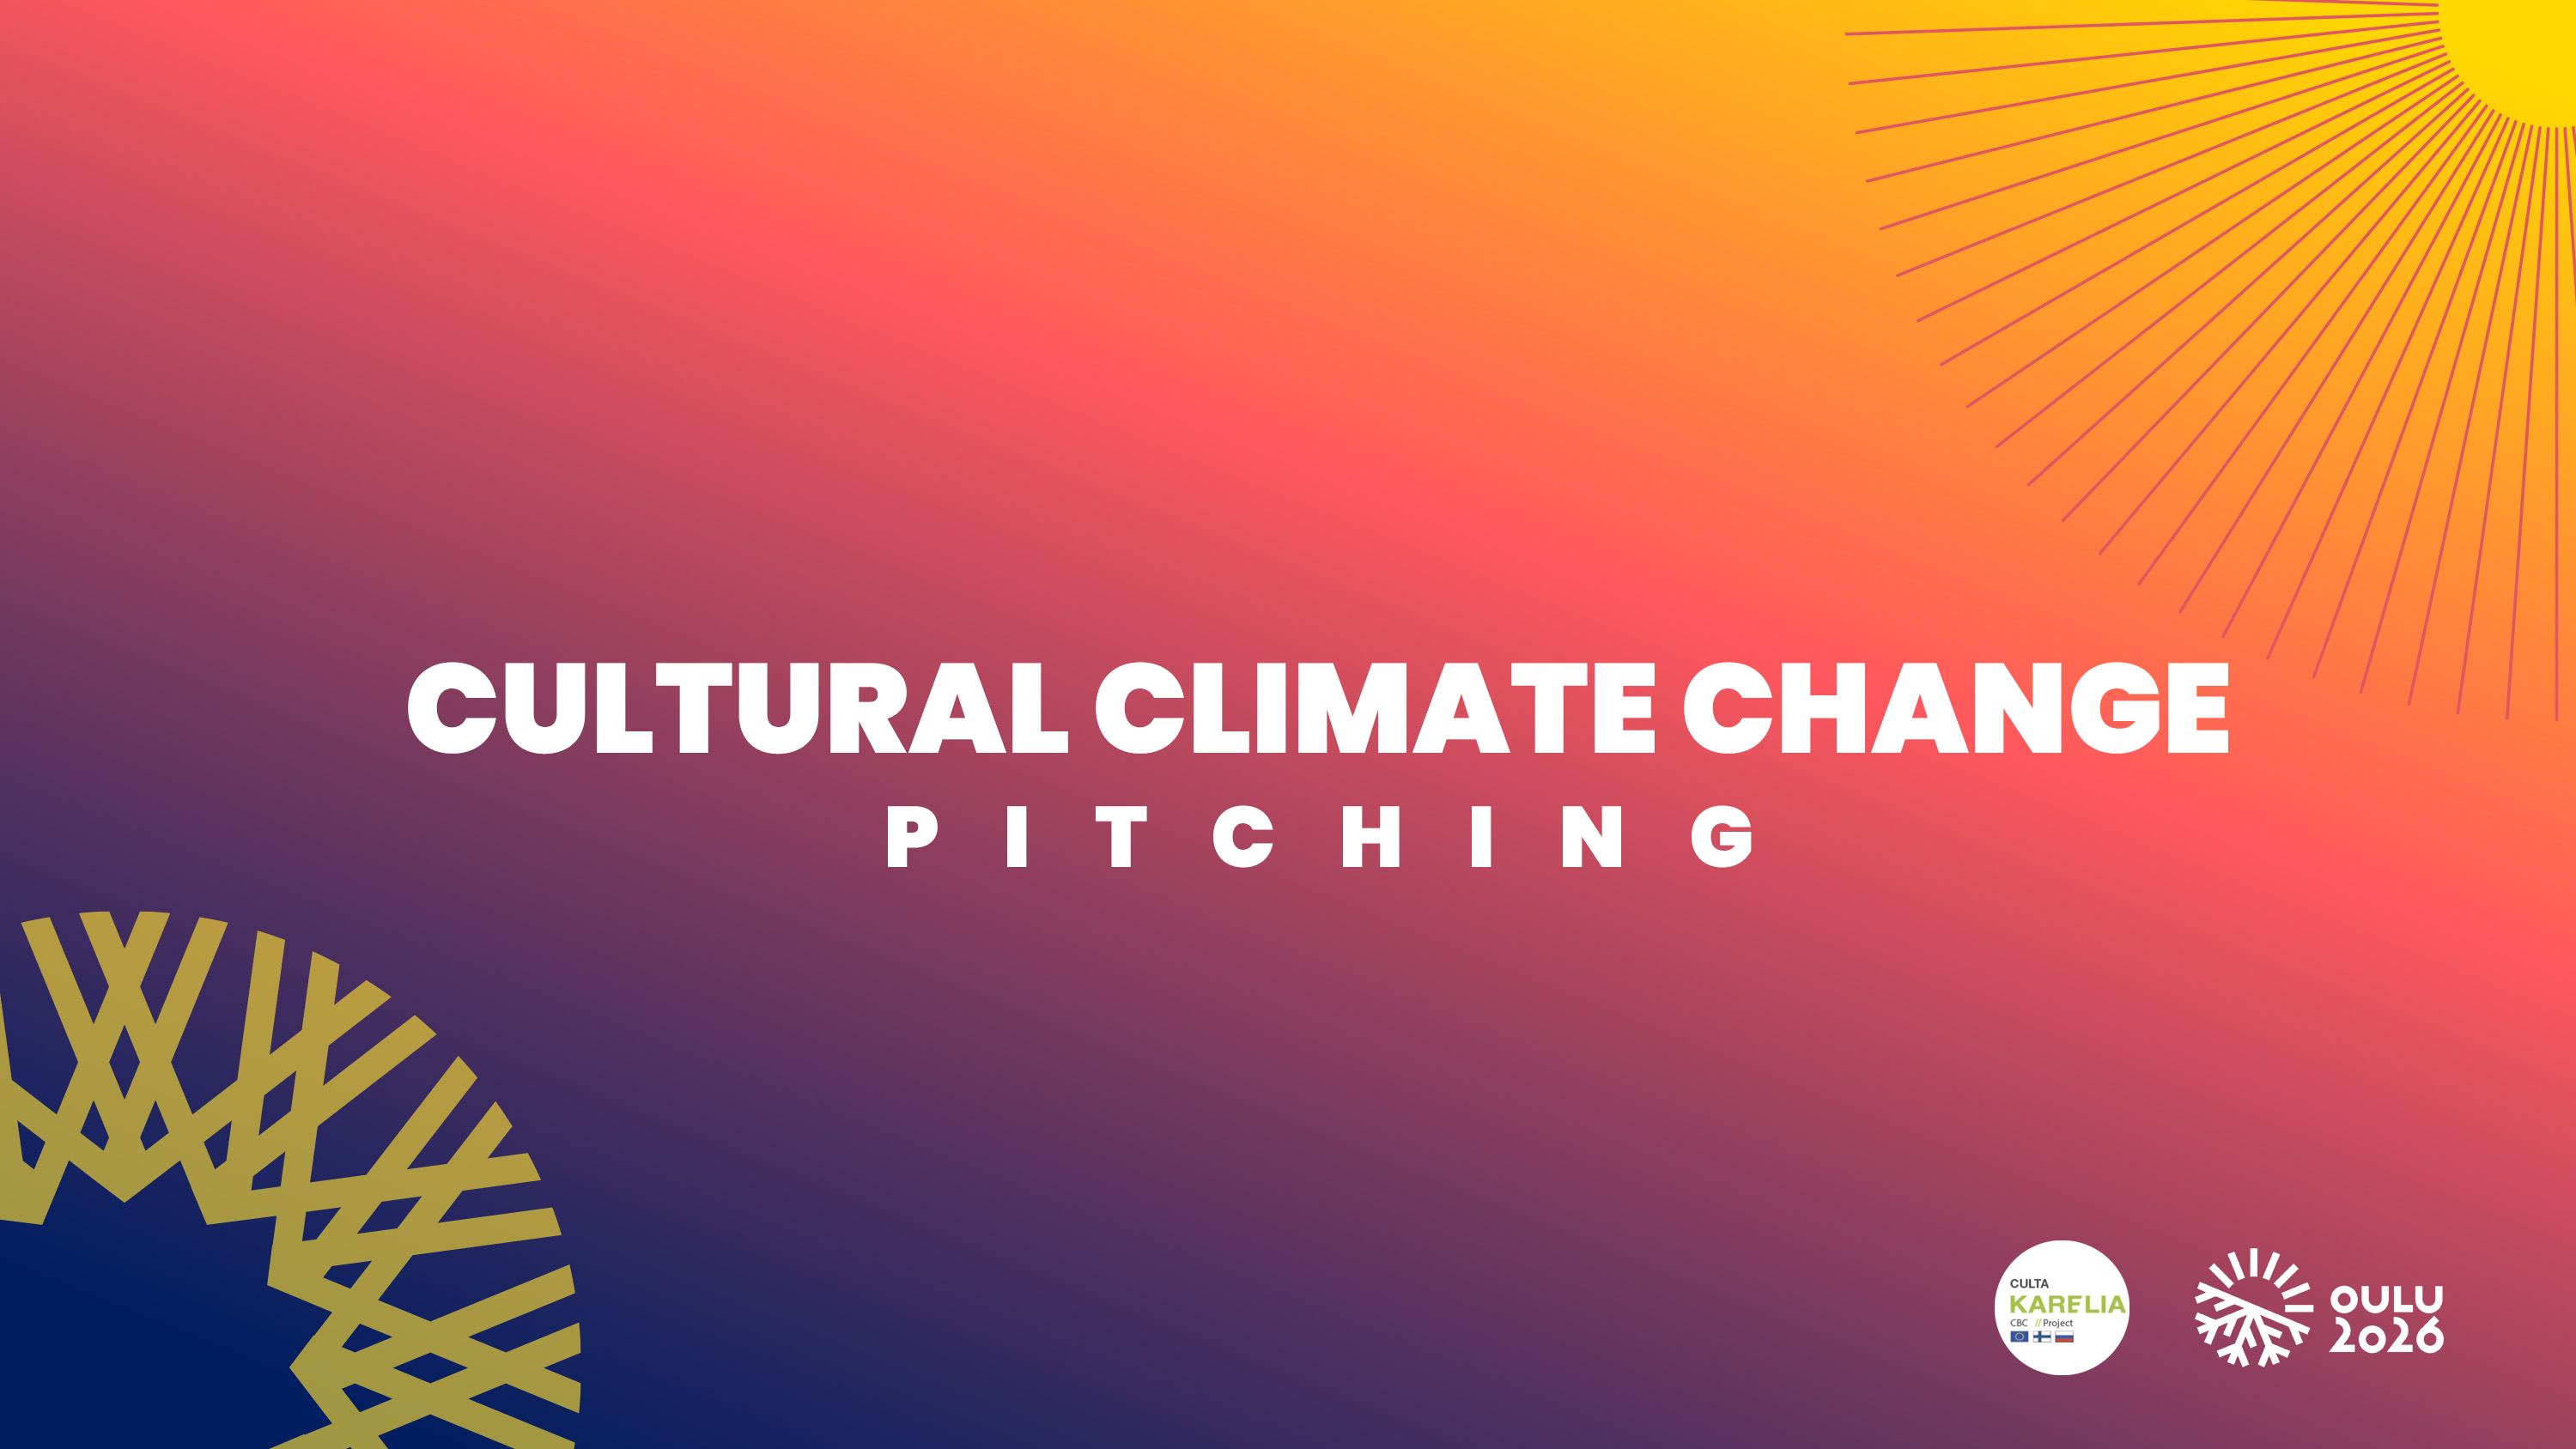 Cultural Climate Change Pitching competition online from Oulu the 4th of March 2021